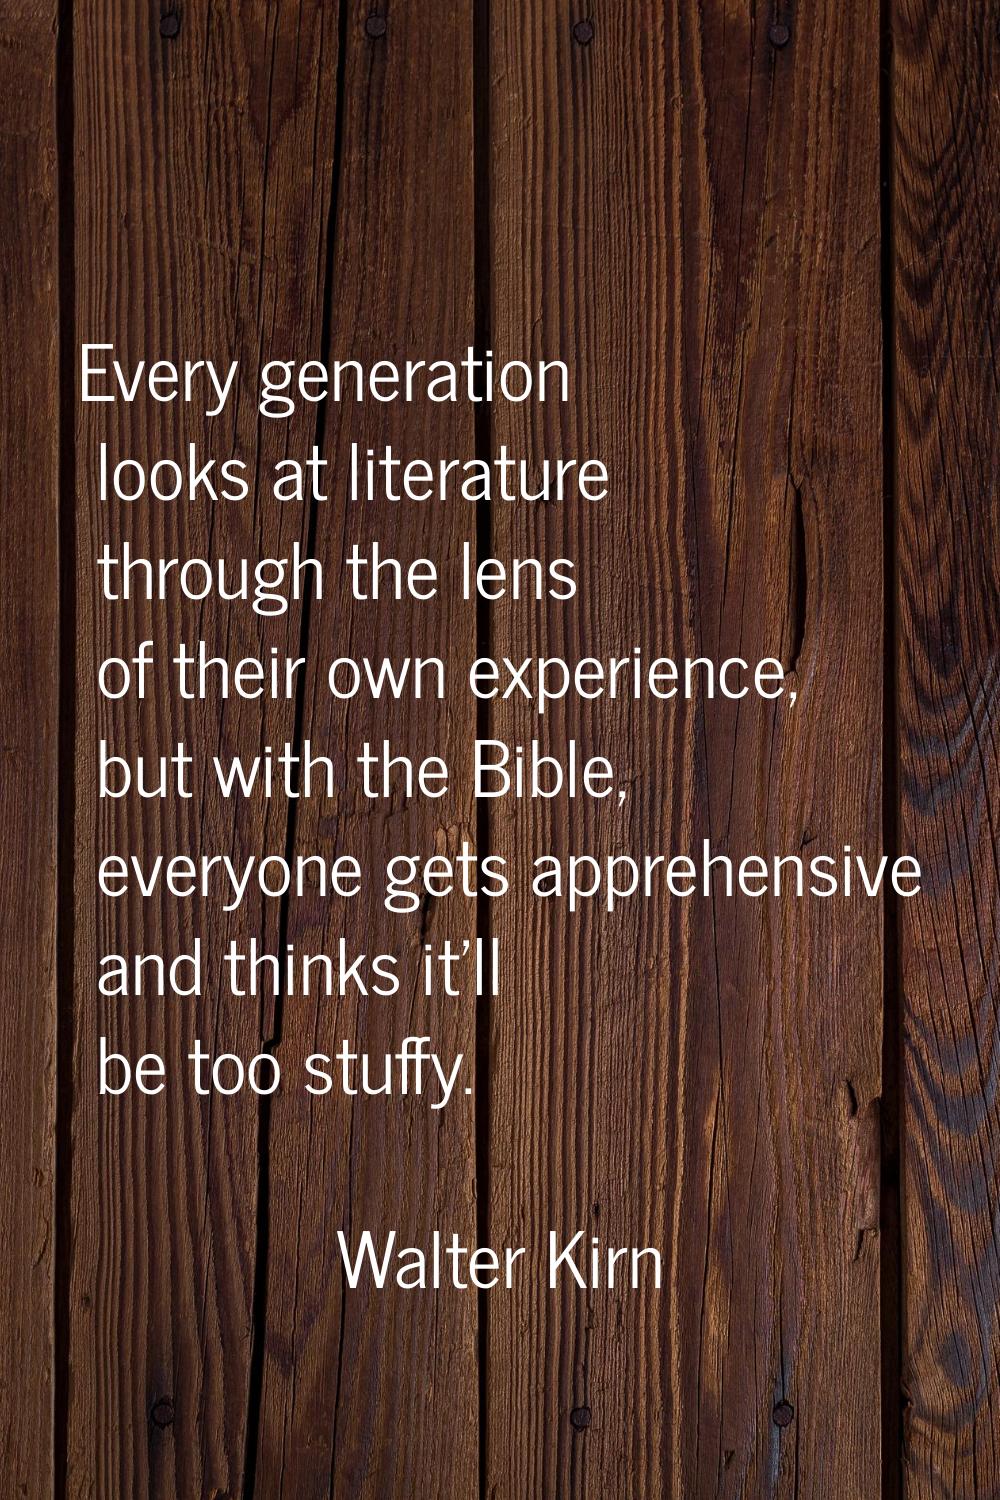 Every generation looks at literature through the lens of their own experience, but with the Bible, 